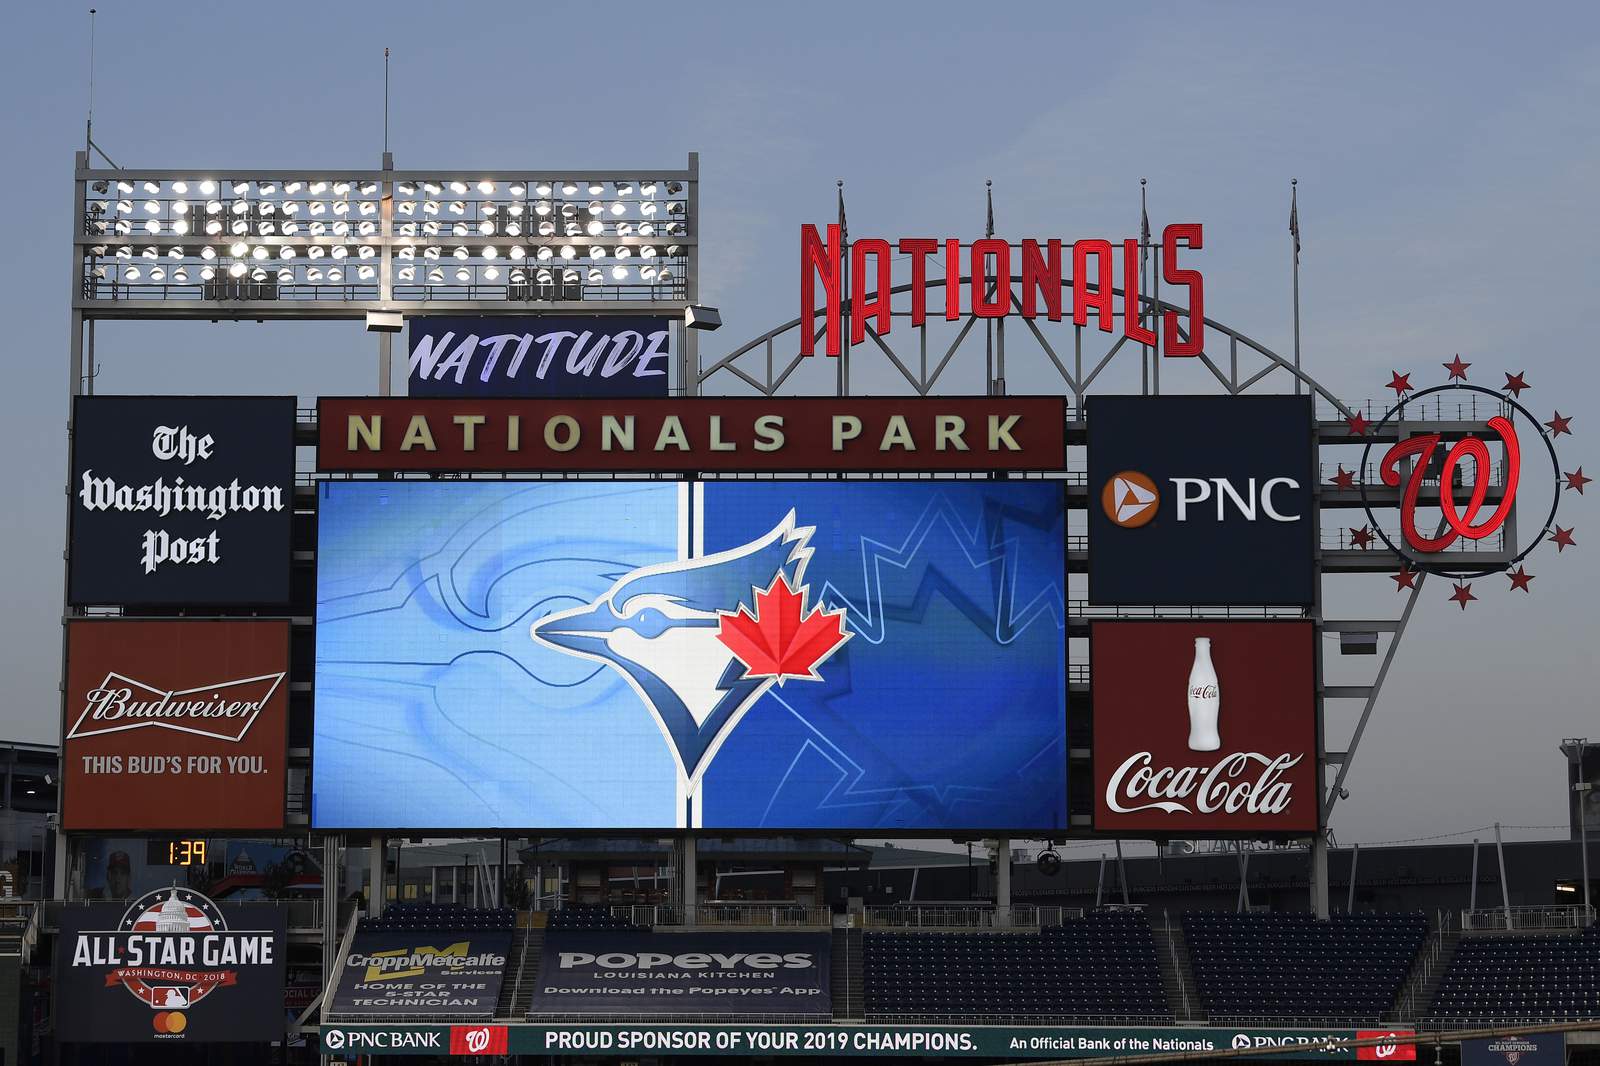 4-run 10th for Nats spoils Blue Jays home opener in DC